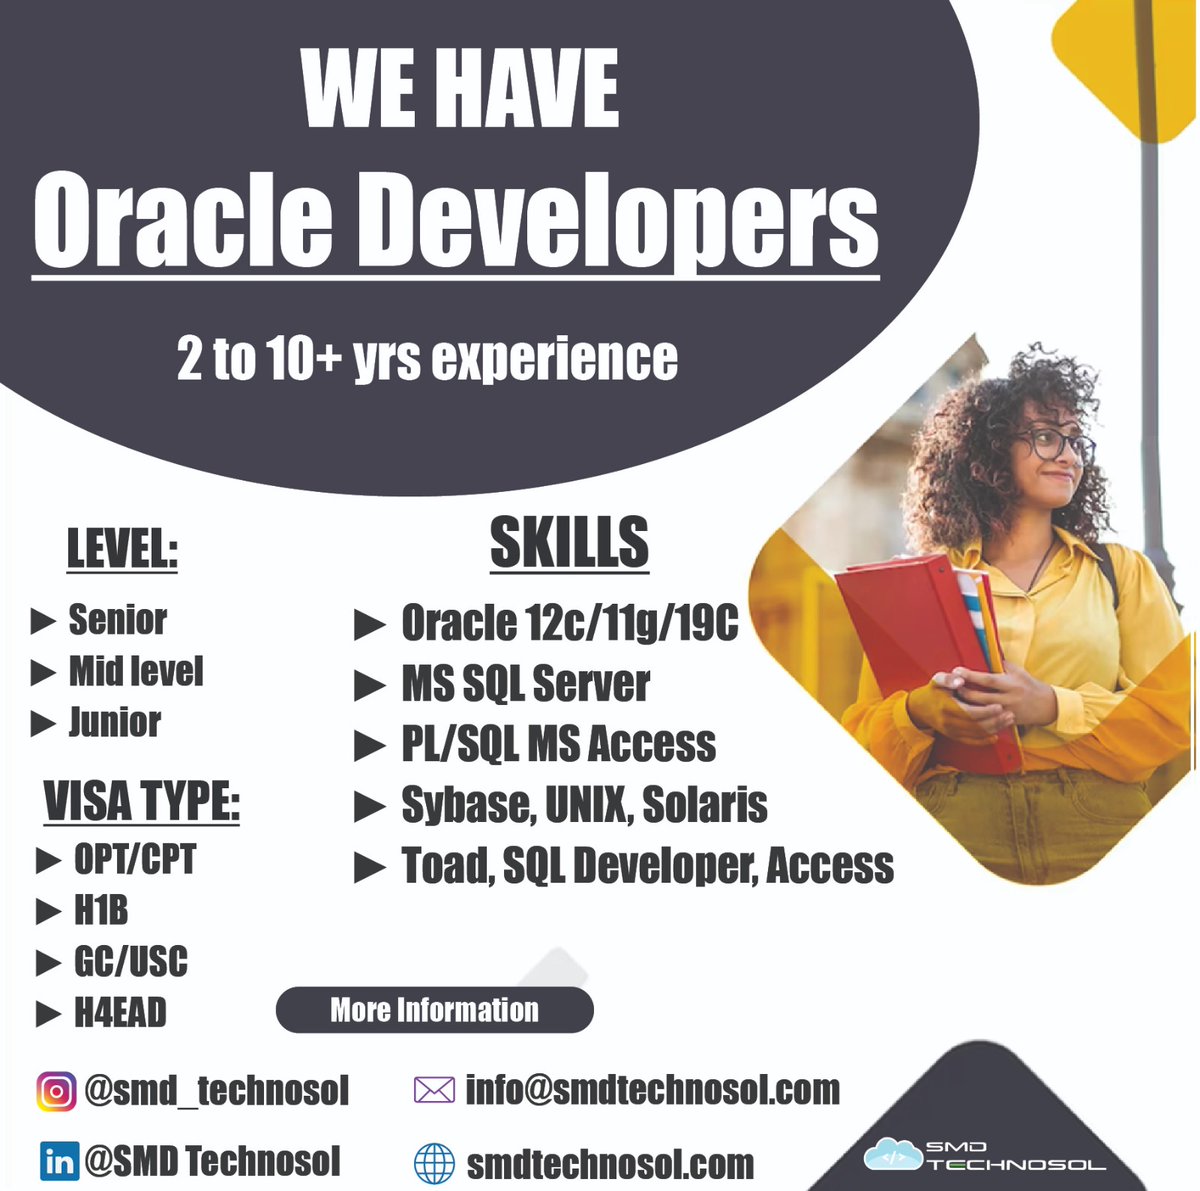 Still hiring Oracle Developers?
We have experienced Oracle Developers. If you're hiring feel free to contact us.
Follow and DM us for more information.
#recruitment #usajobs #hiring #smdtechnosol #usstaffing #dallas #texas #hrconsulting #oracle #oraclejobs #oracledeveloper